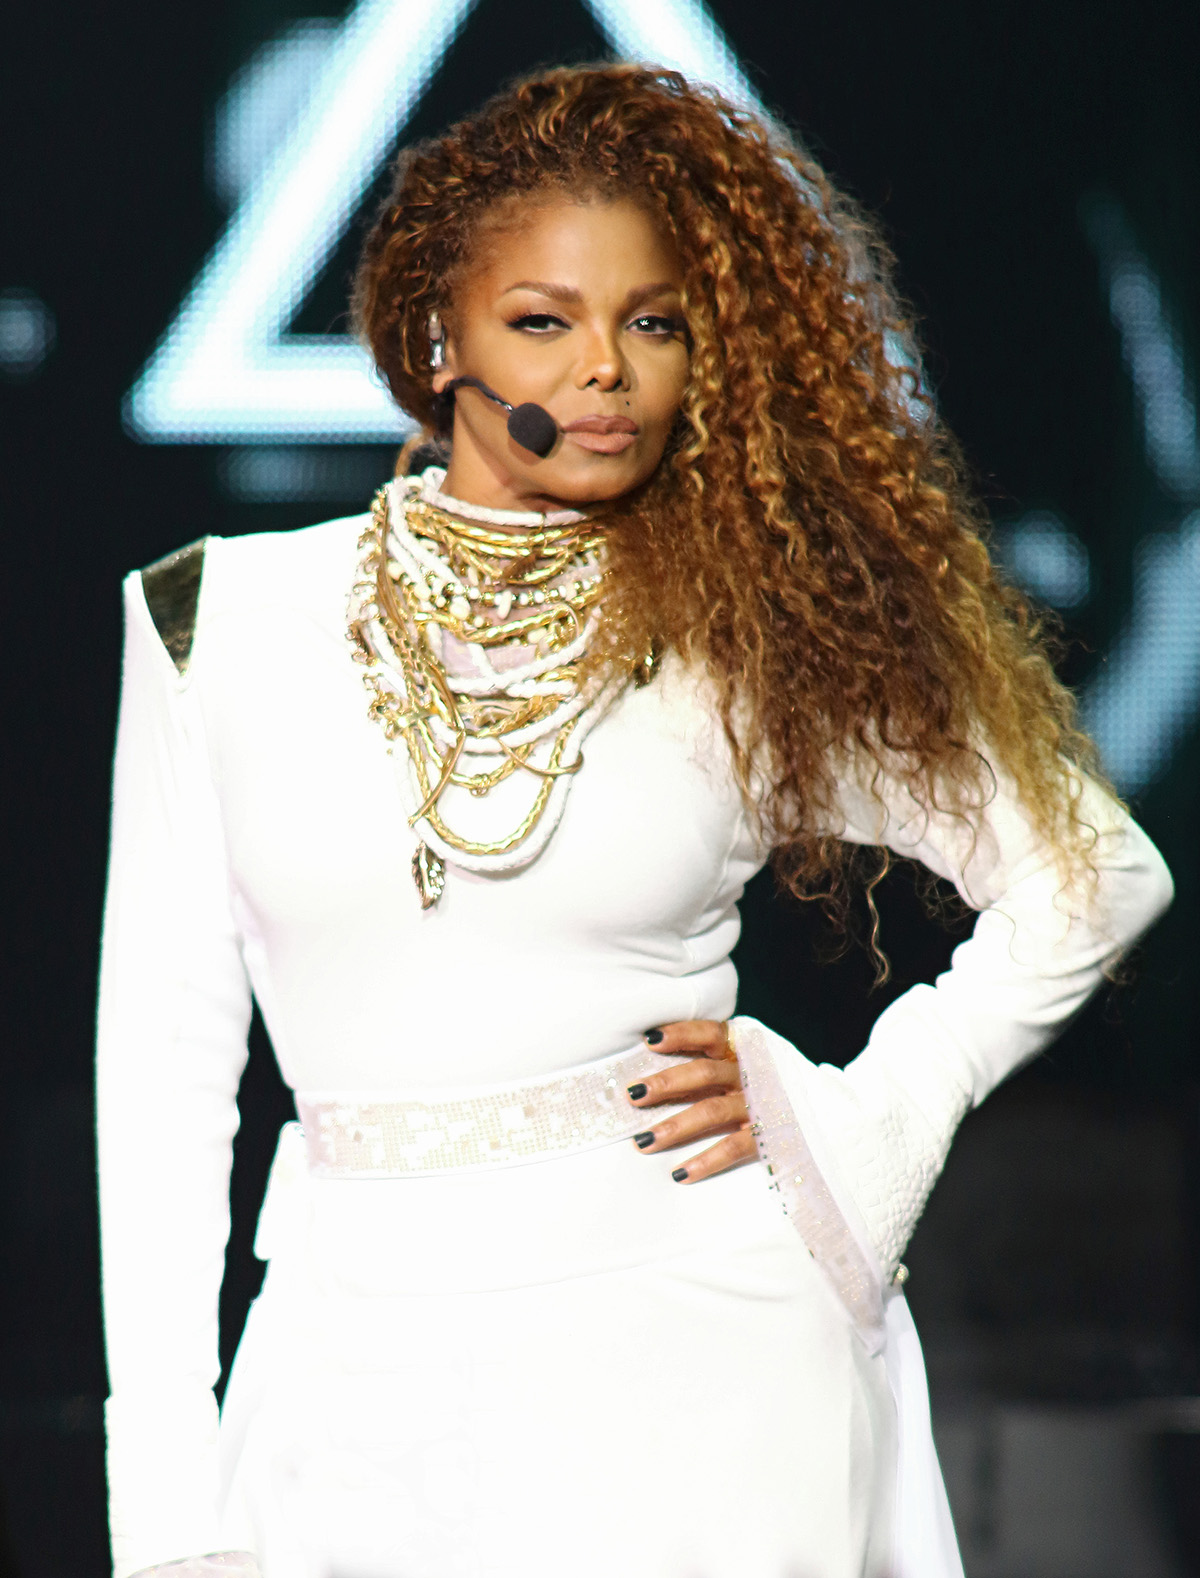 Janet Jackson confirms she is pregnant with her first child at 50